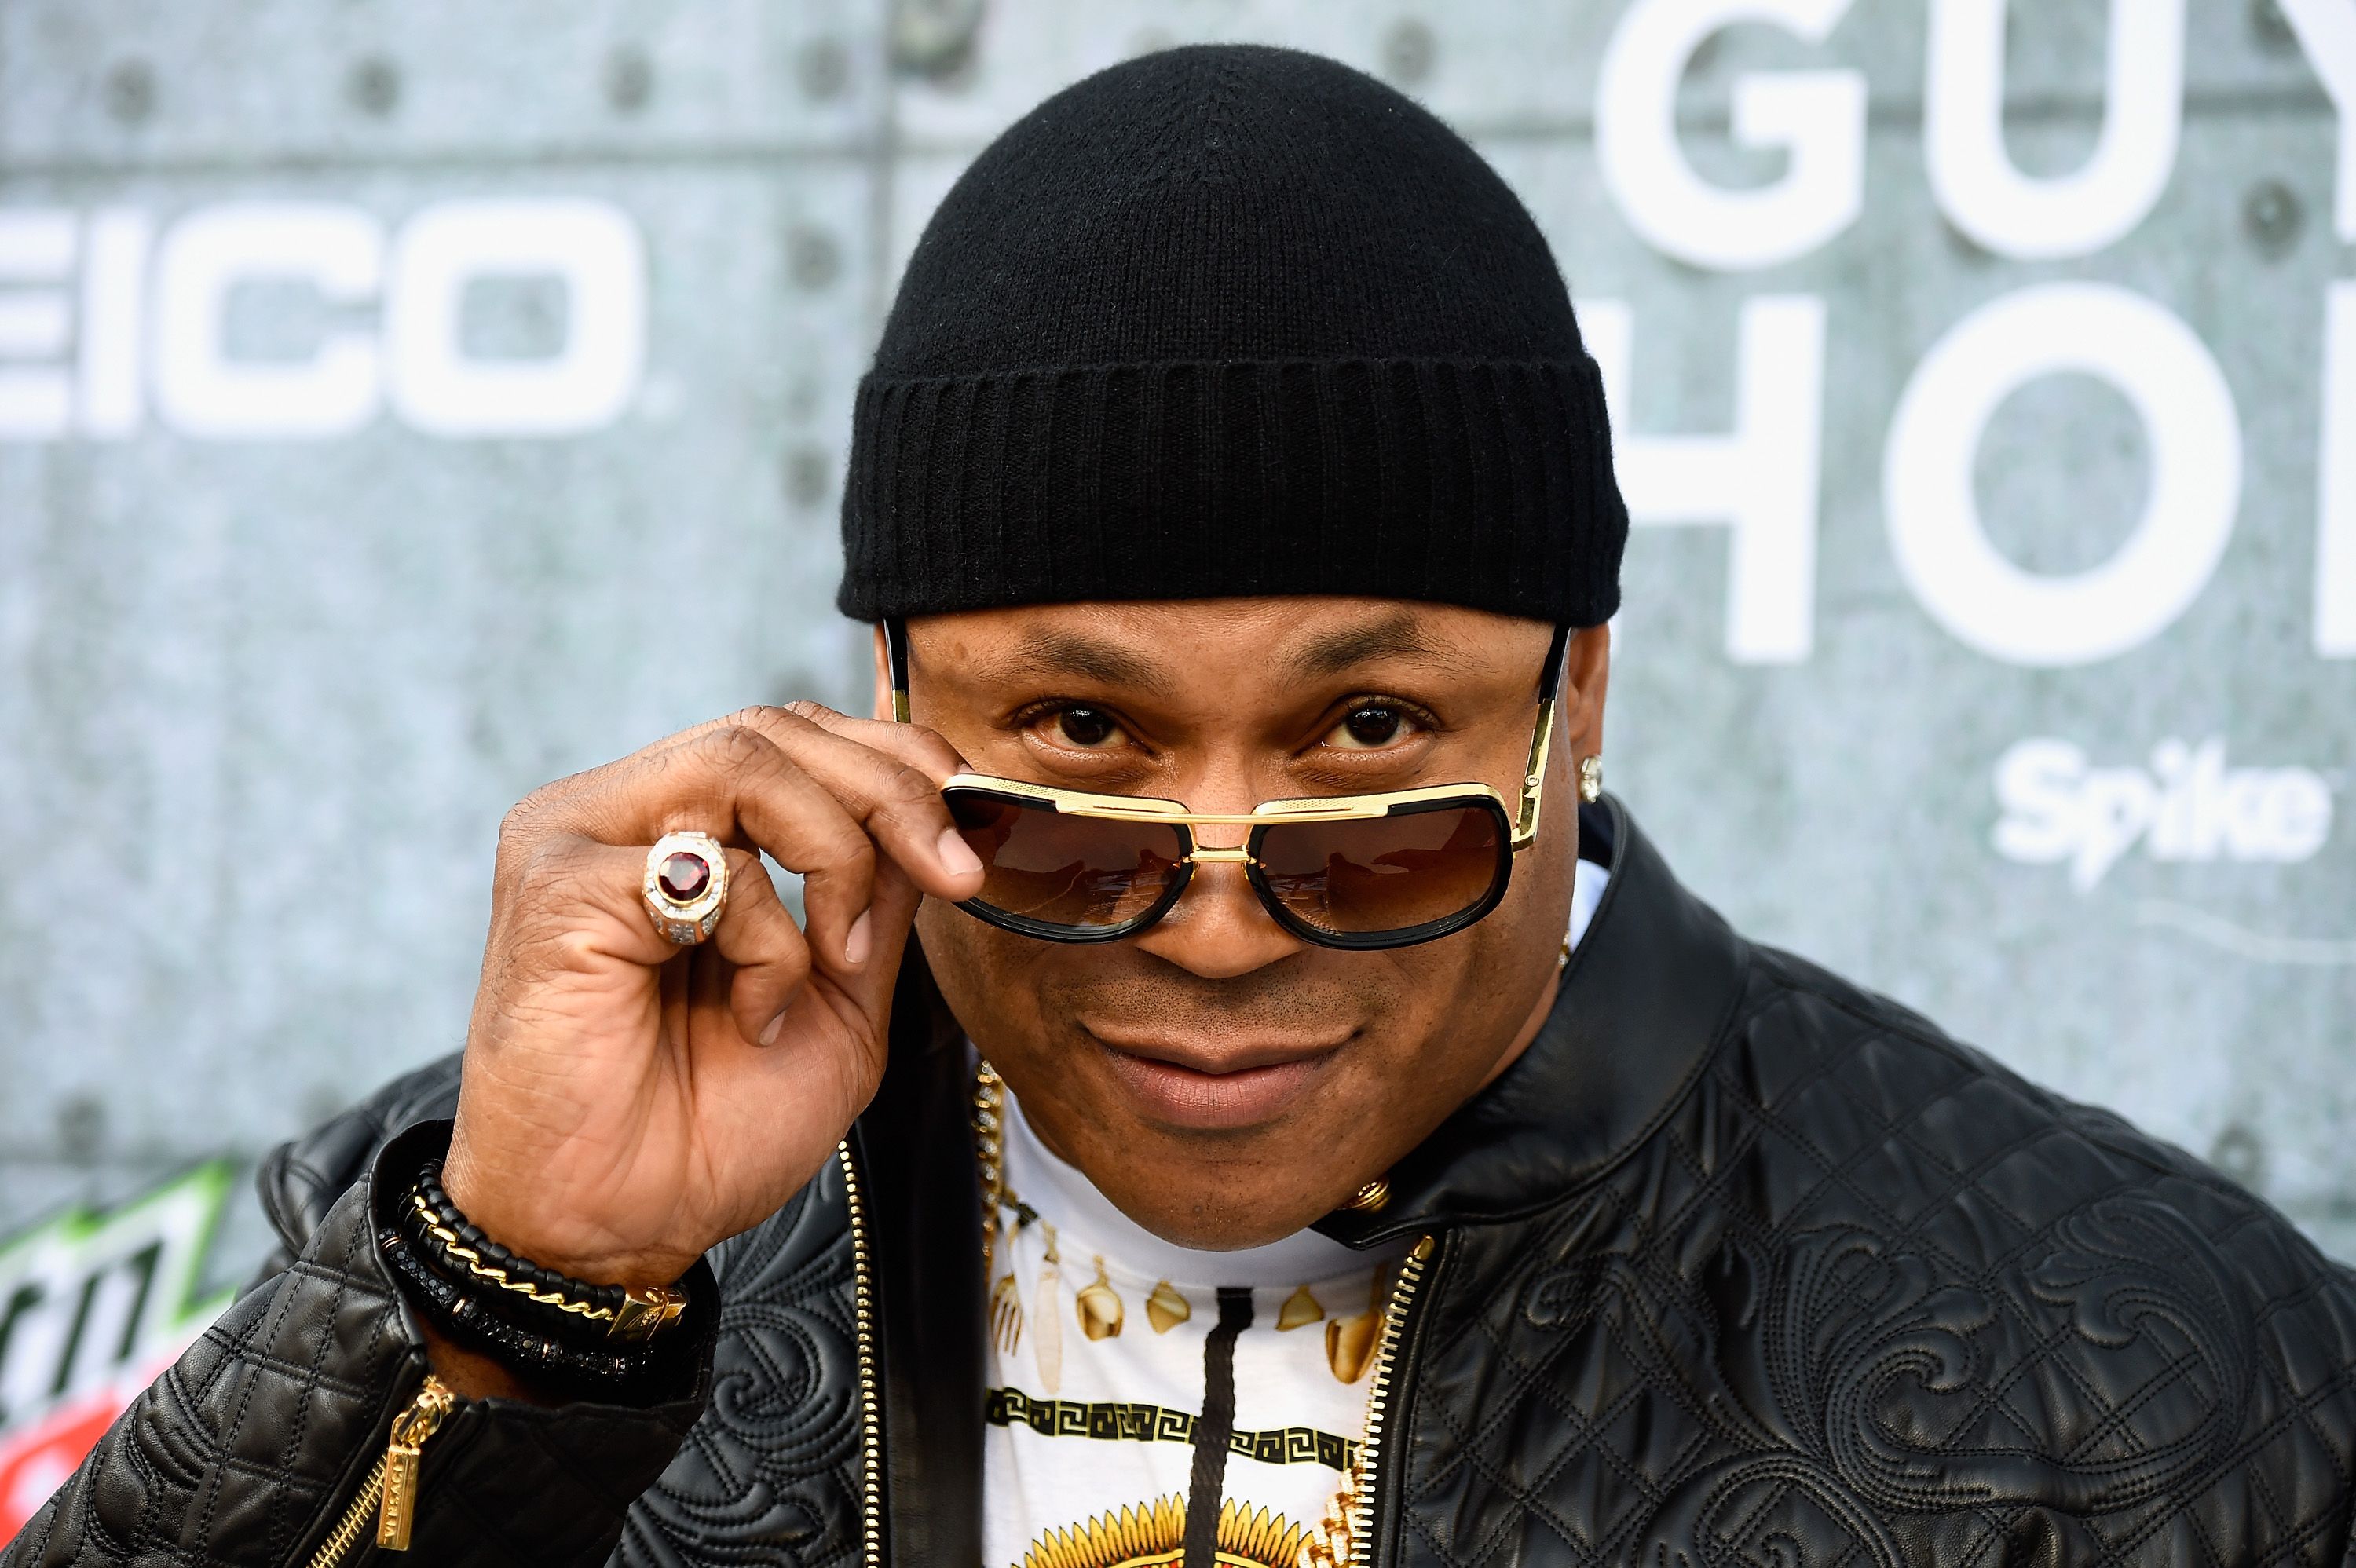 LL Cool J during Spike TV's Guys Choice 2015 at Sony Pictures Studios on June 6, 2015 | Photo: Getty Images